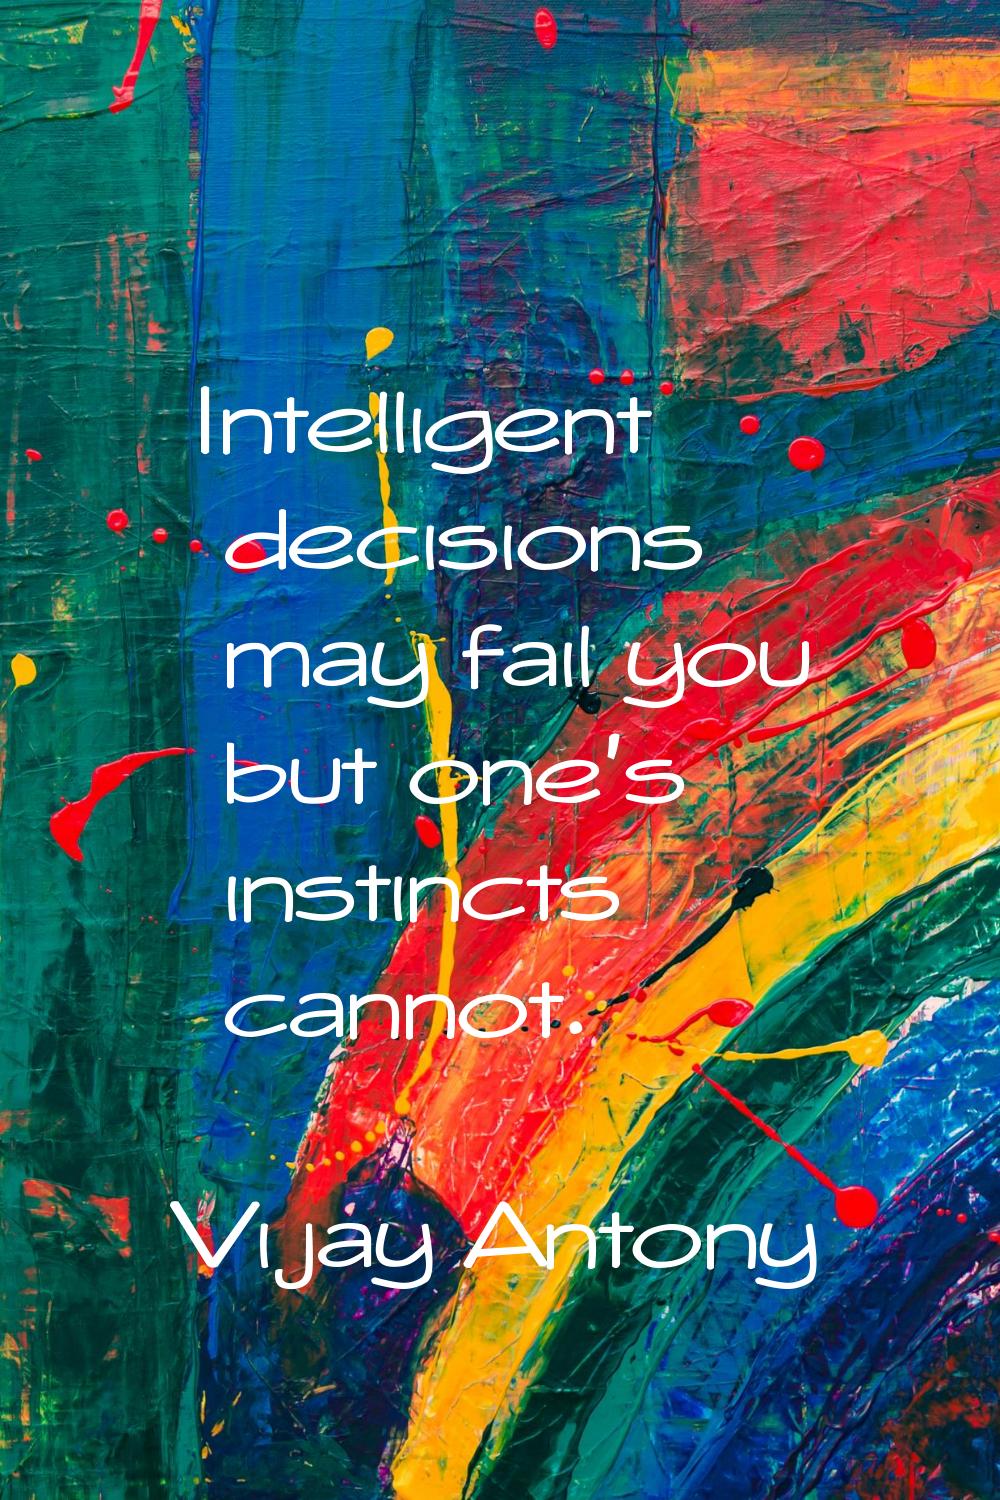 Intelligent decisions may fail you but one's instincts cannot.